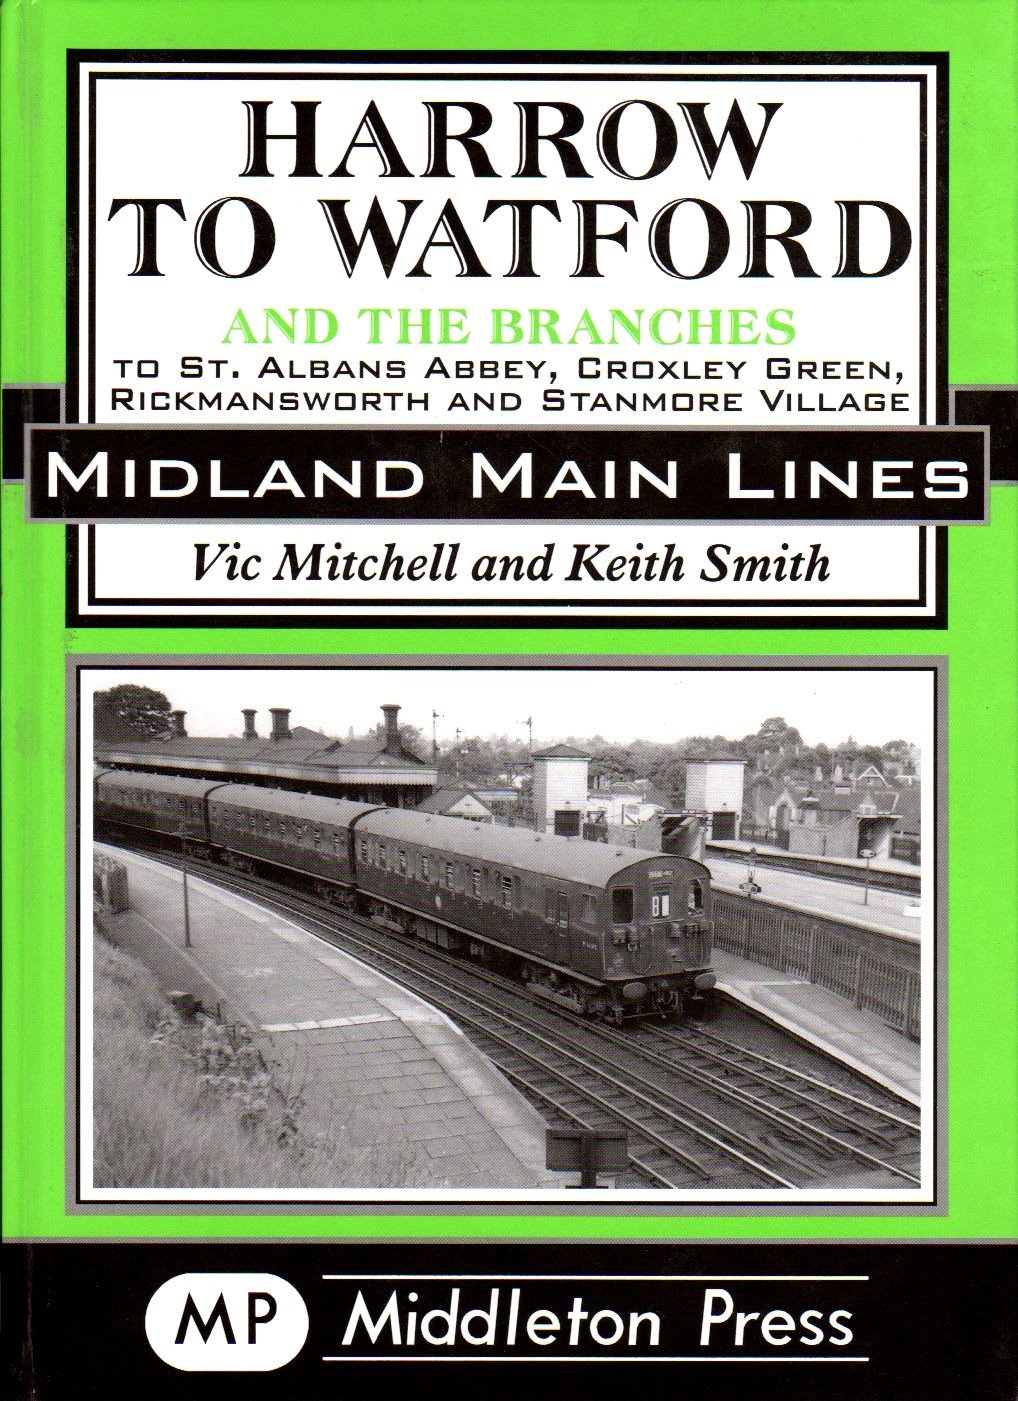 Midland Main Lines Harrow to Watford including the branches to St. Albans Abbey, Croxley Green, Rickmansworth and Stanmore Village